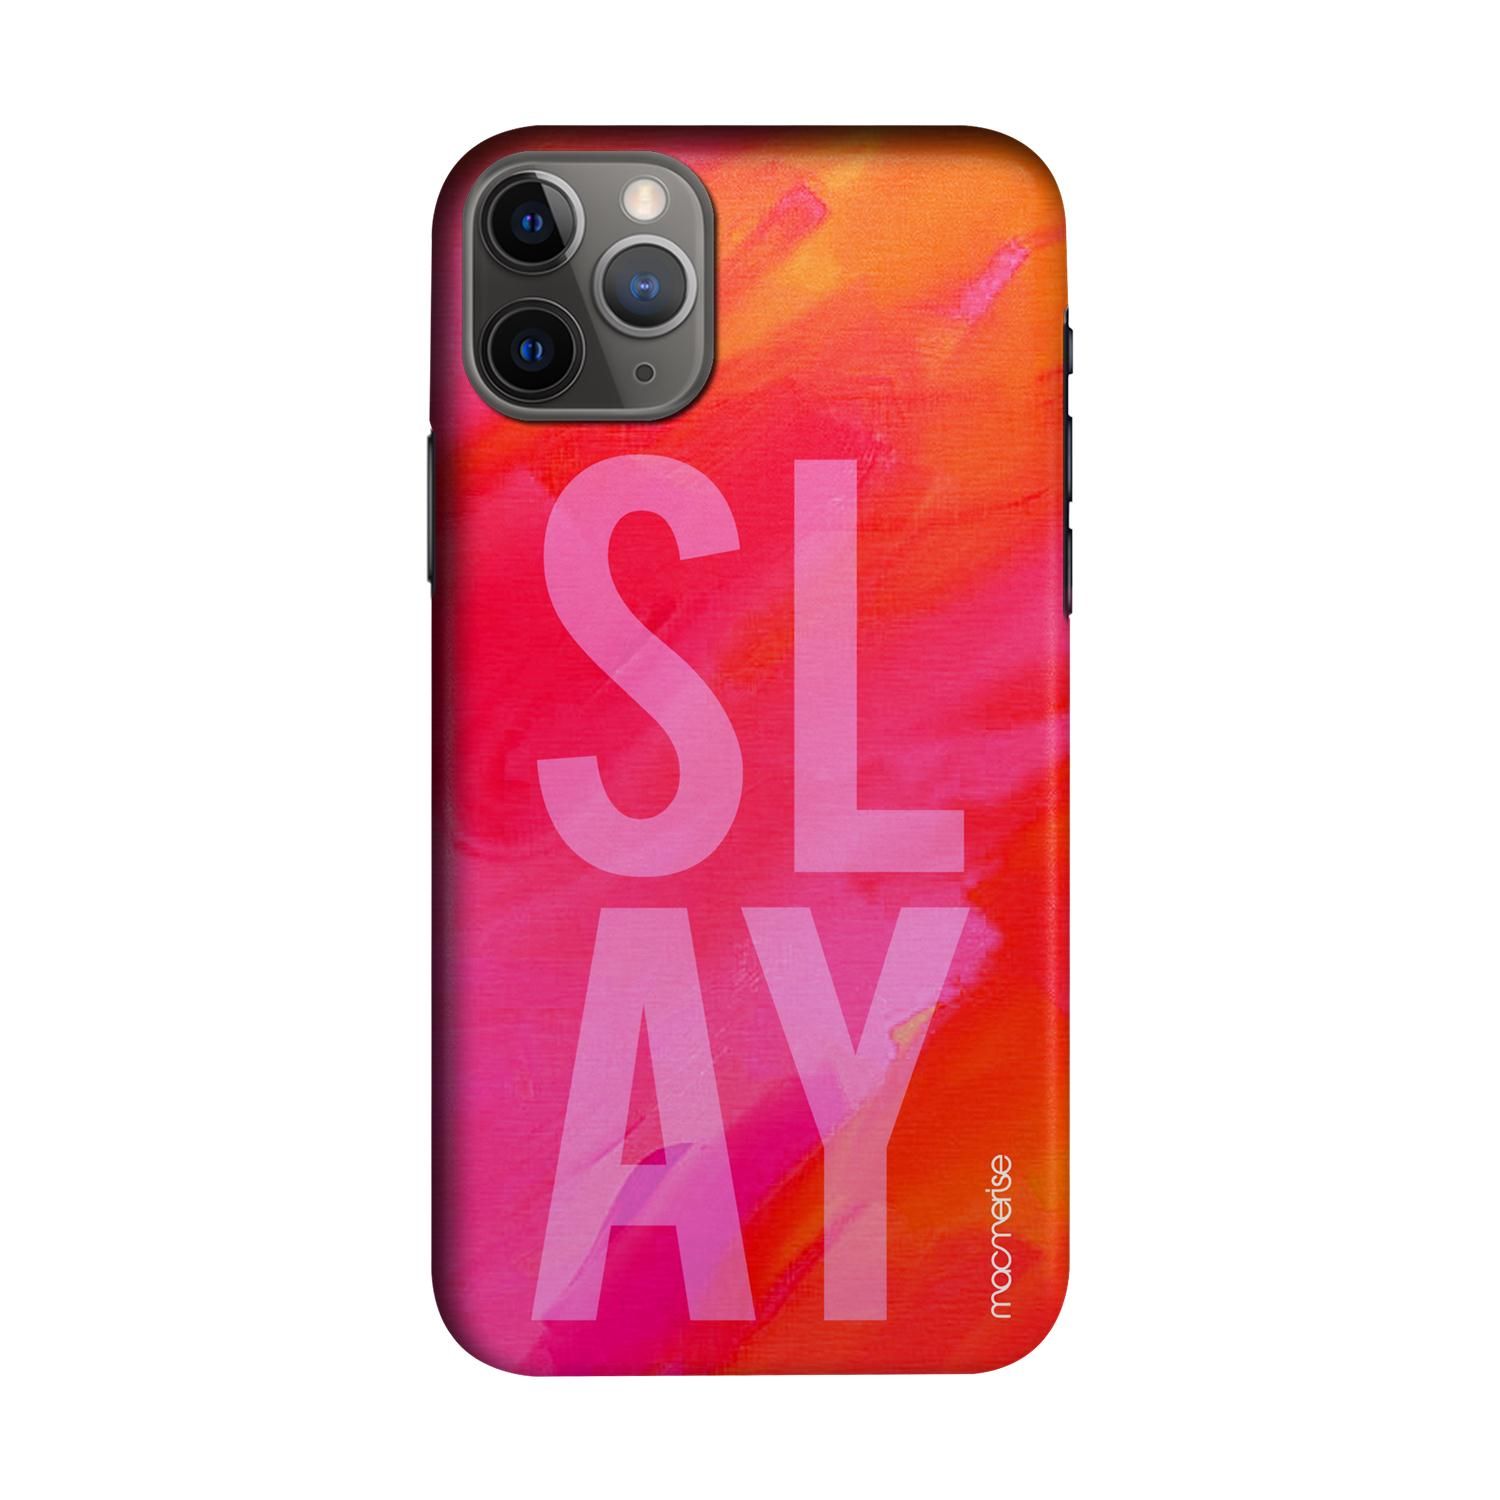 Buy Slay Pink - Sleek Phone Case for iPhone 11 Pro Max Online